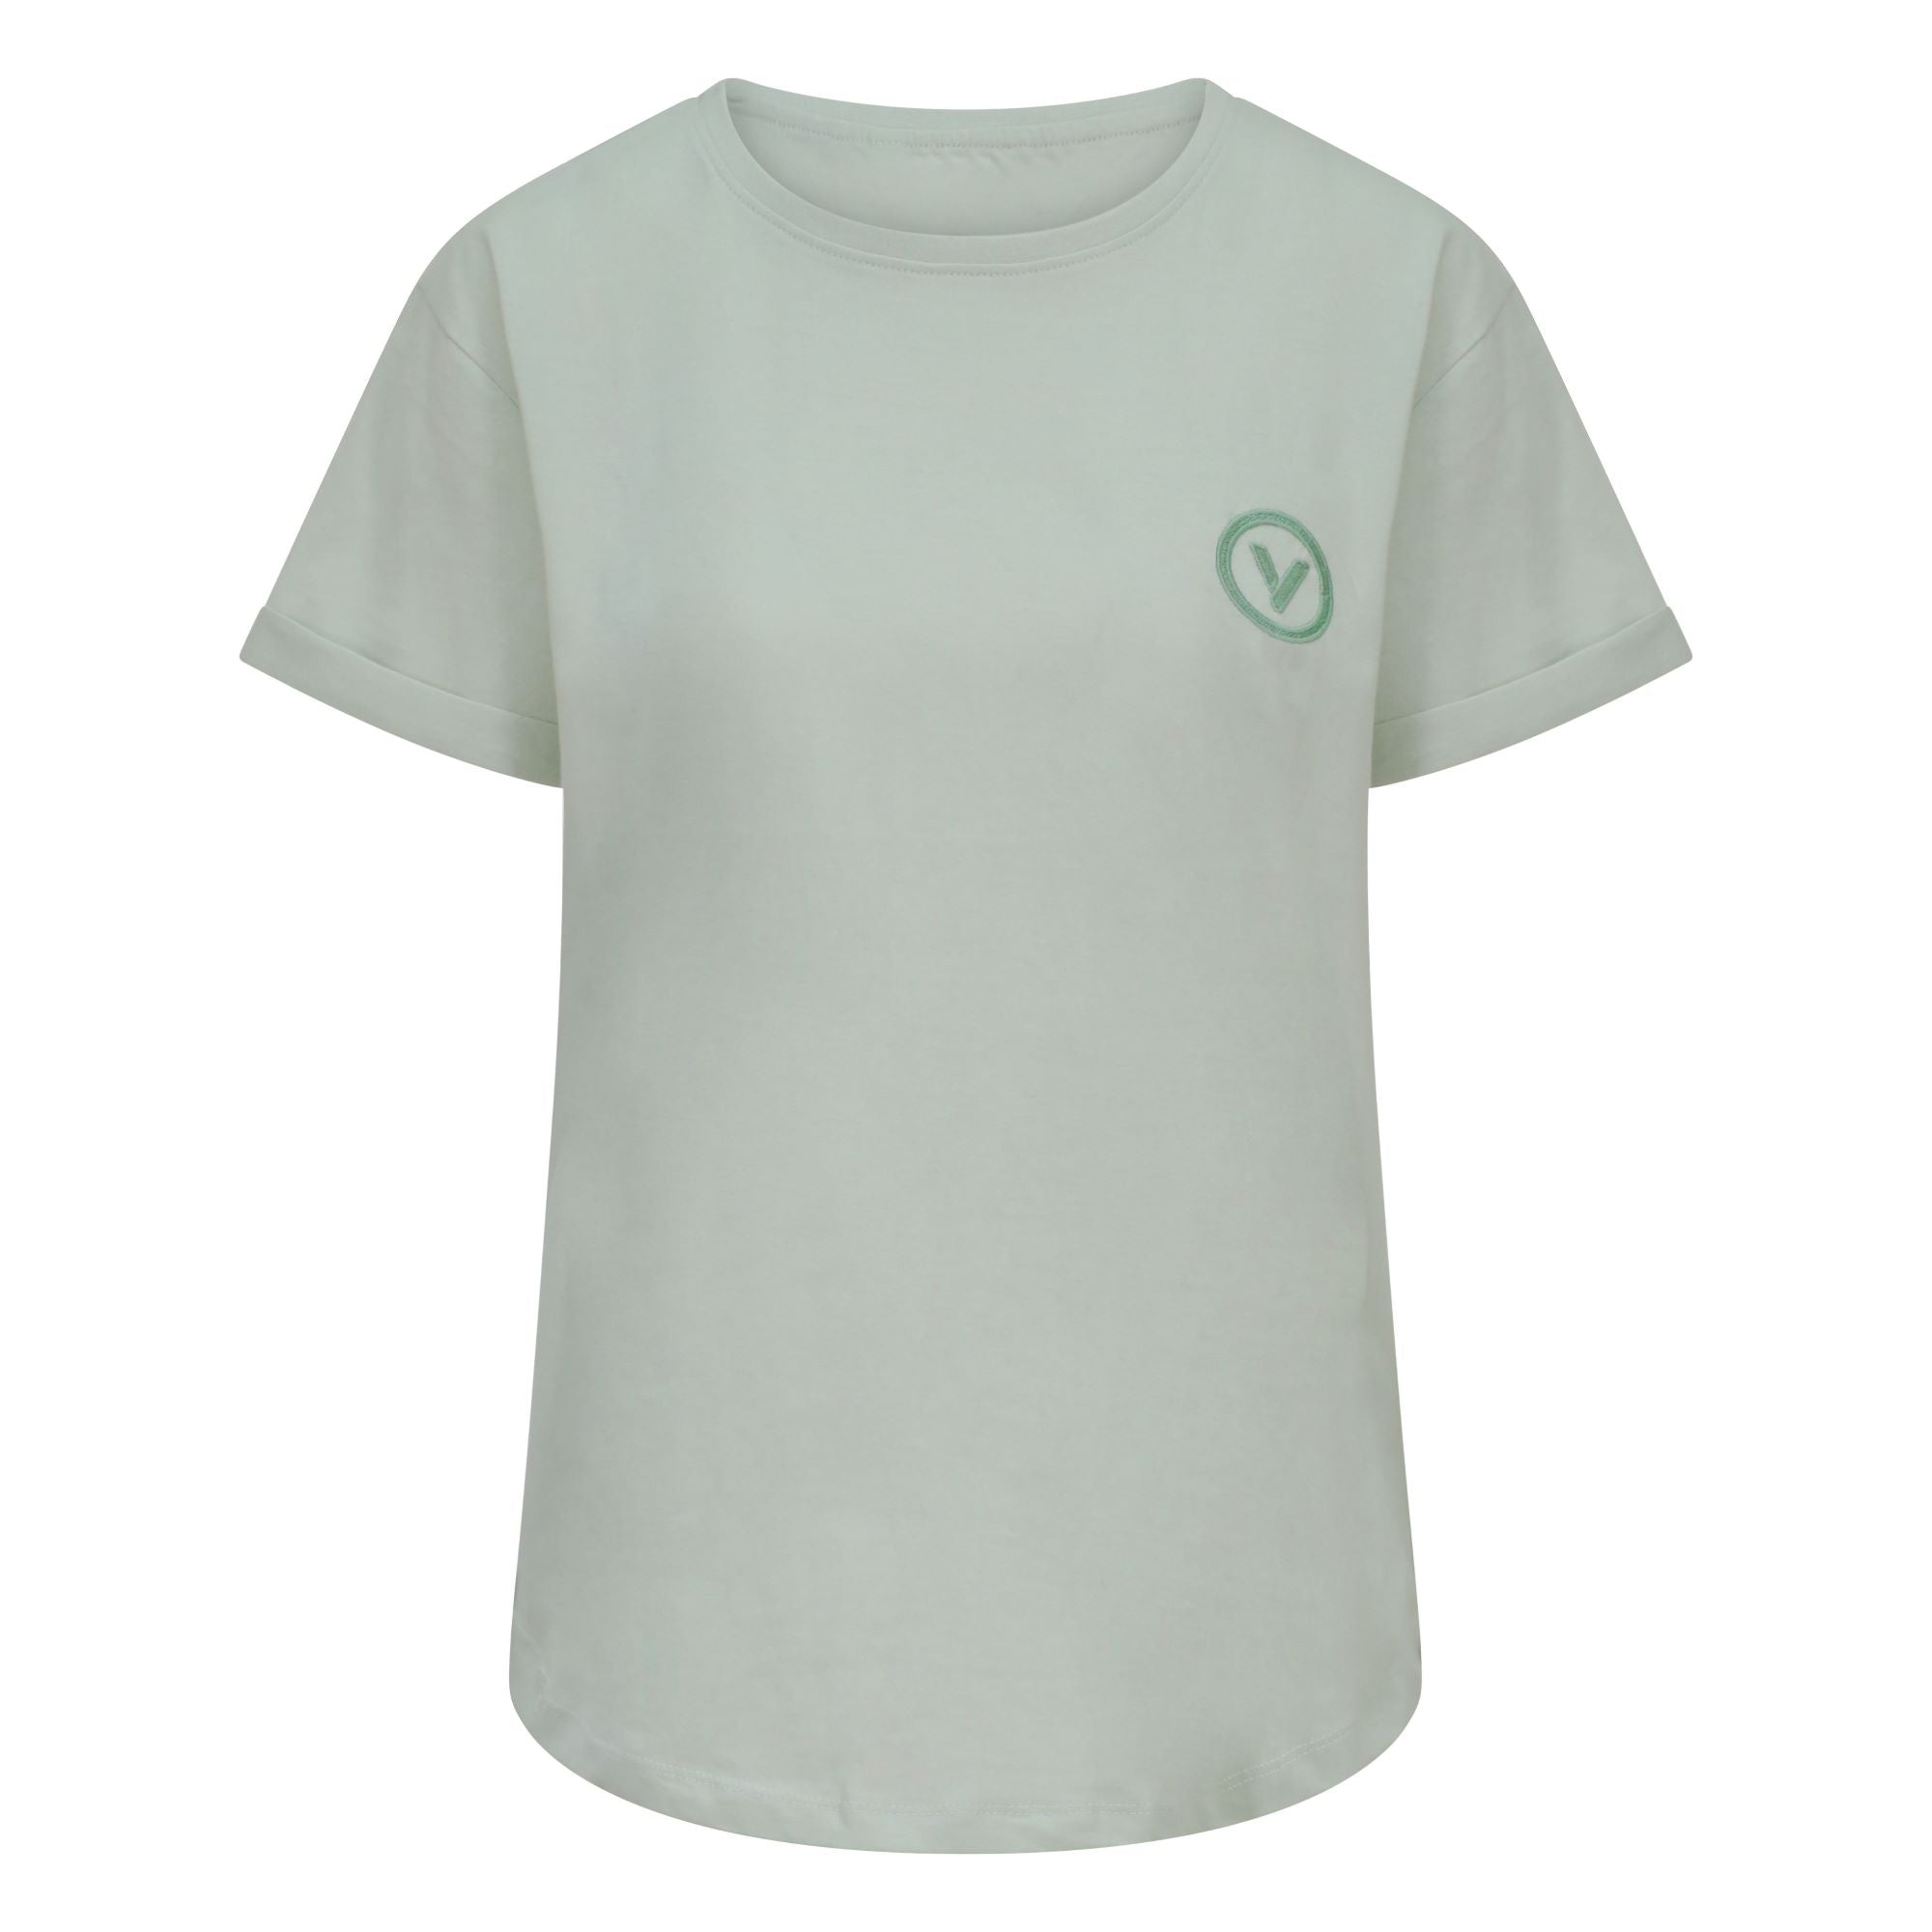 Validate Core Essentials Women's Rolled Sleeve T-Shirt Muted Green